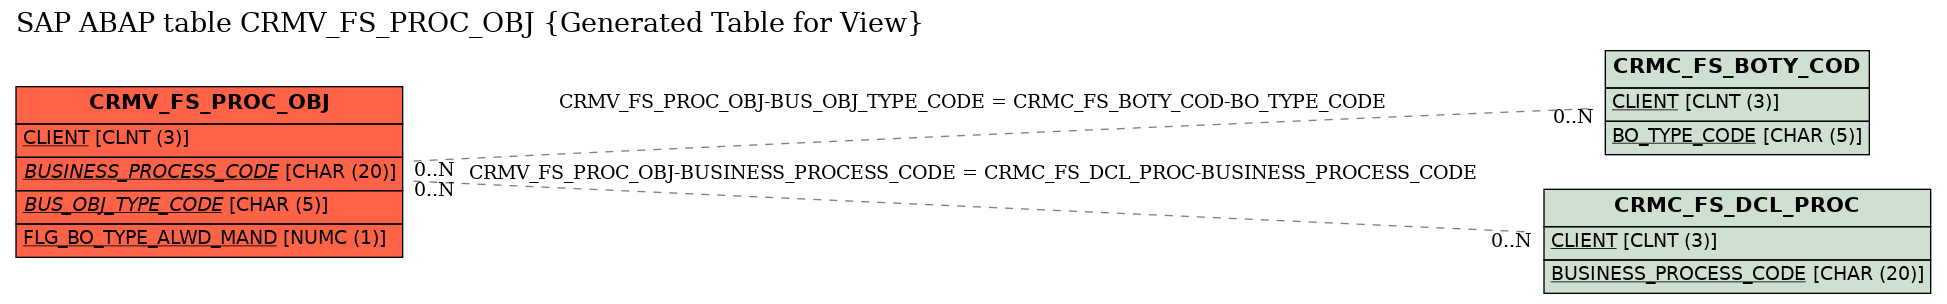 E-R Diagram for table CRMV_FS_PROC_OBJ (Generated Table for View)